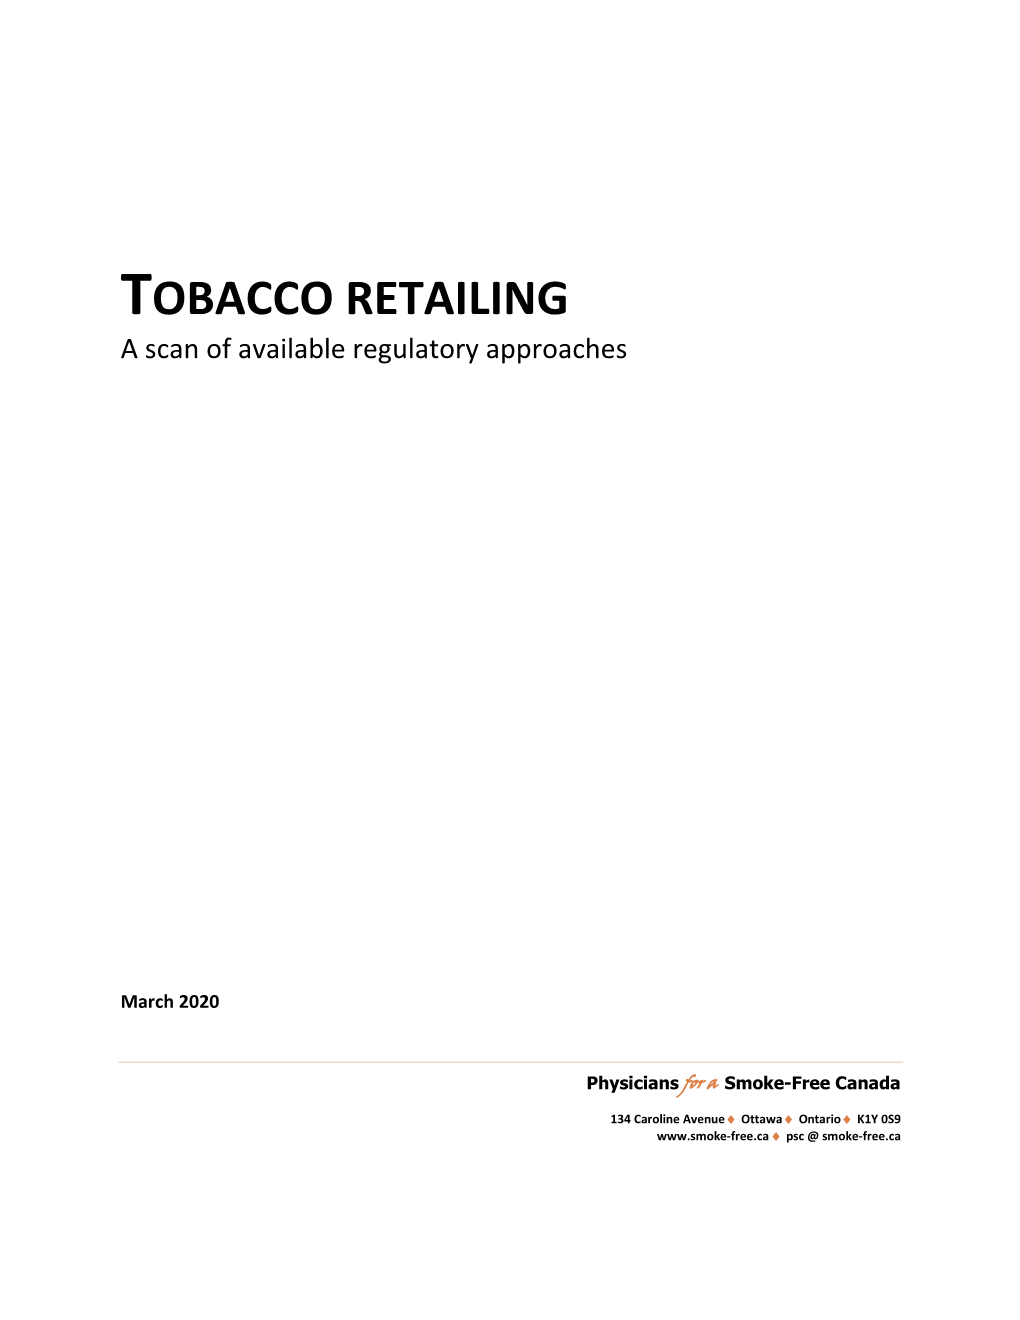 TOBACCO RETAILING a Scan of Available Regulatory Approaches